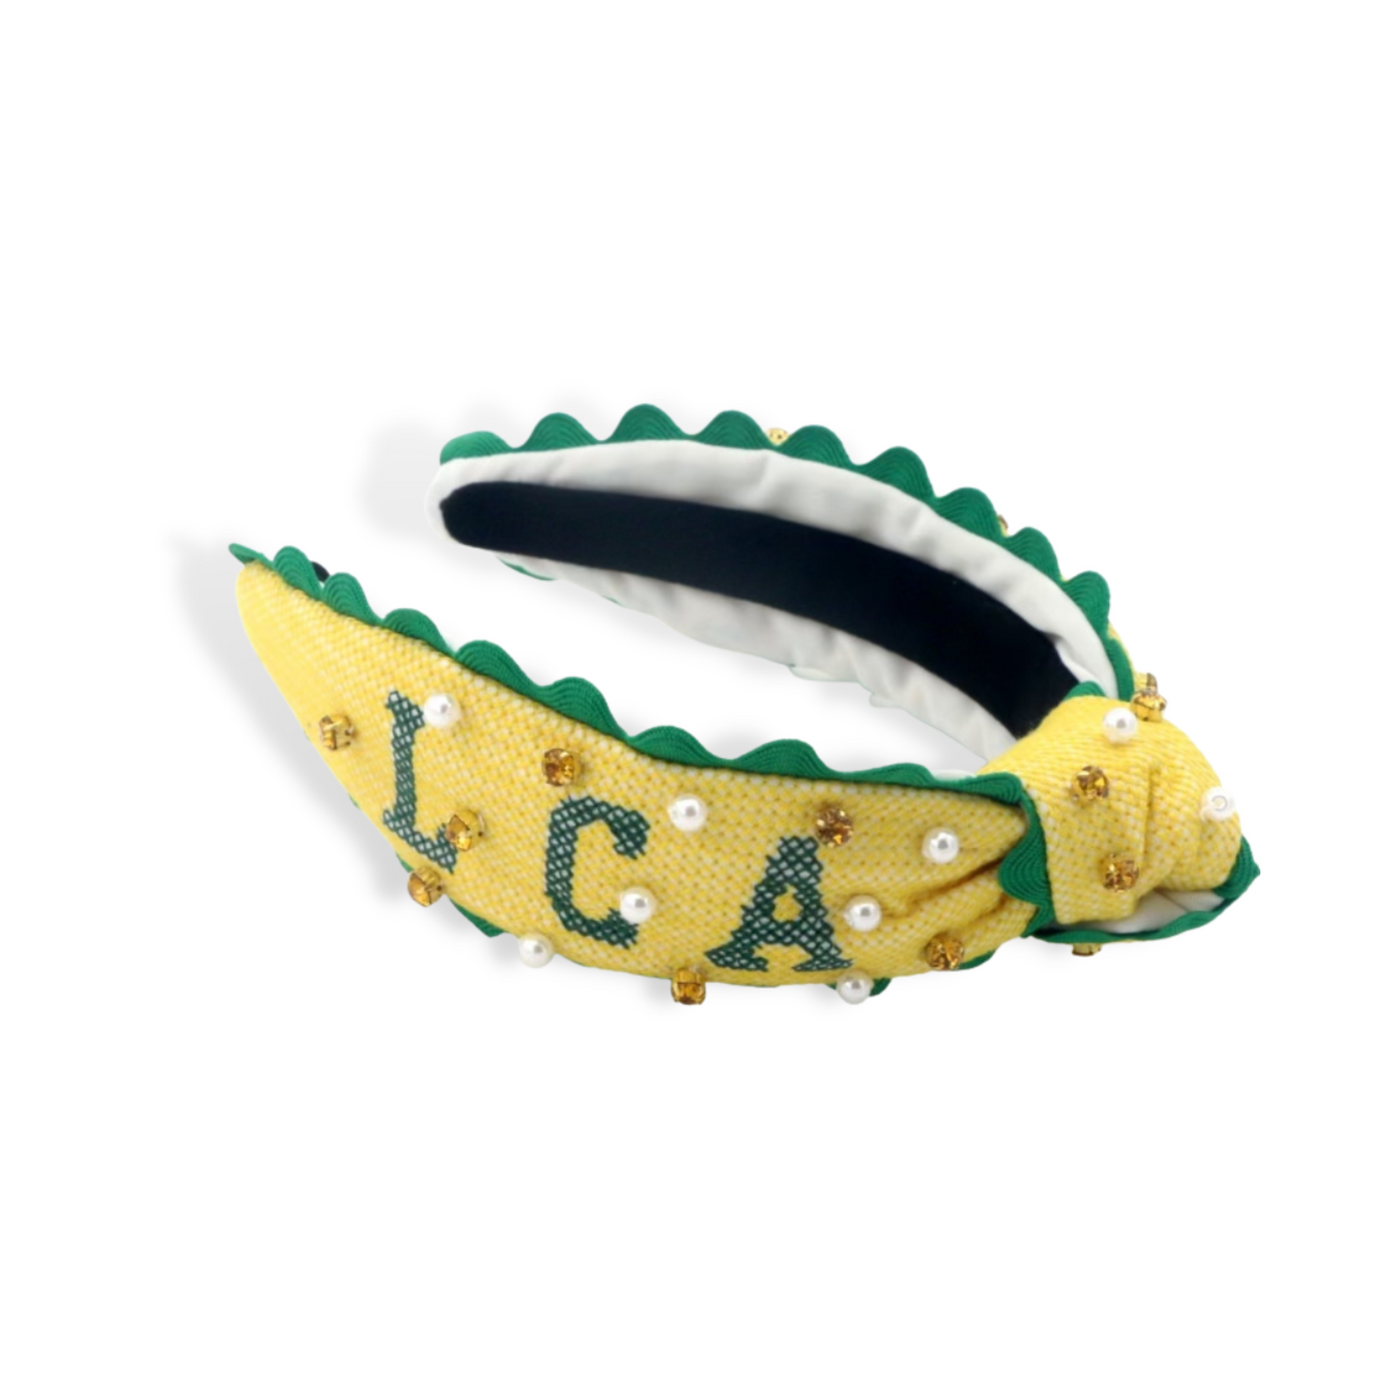 Child Size Cross-stitch LCA Headband With Pearls and Crystals